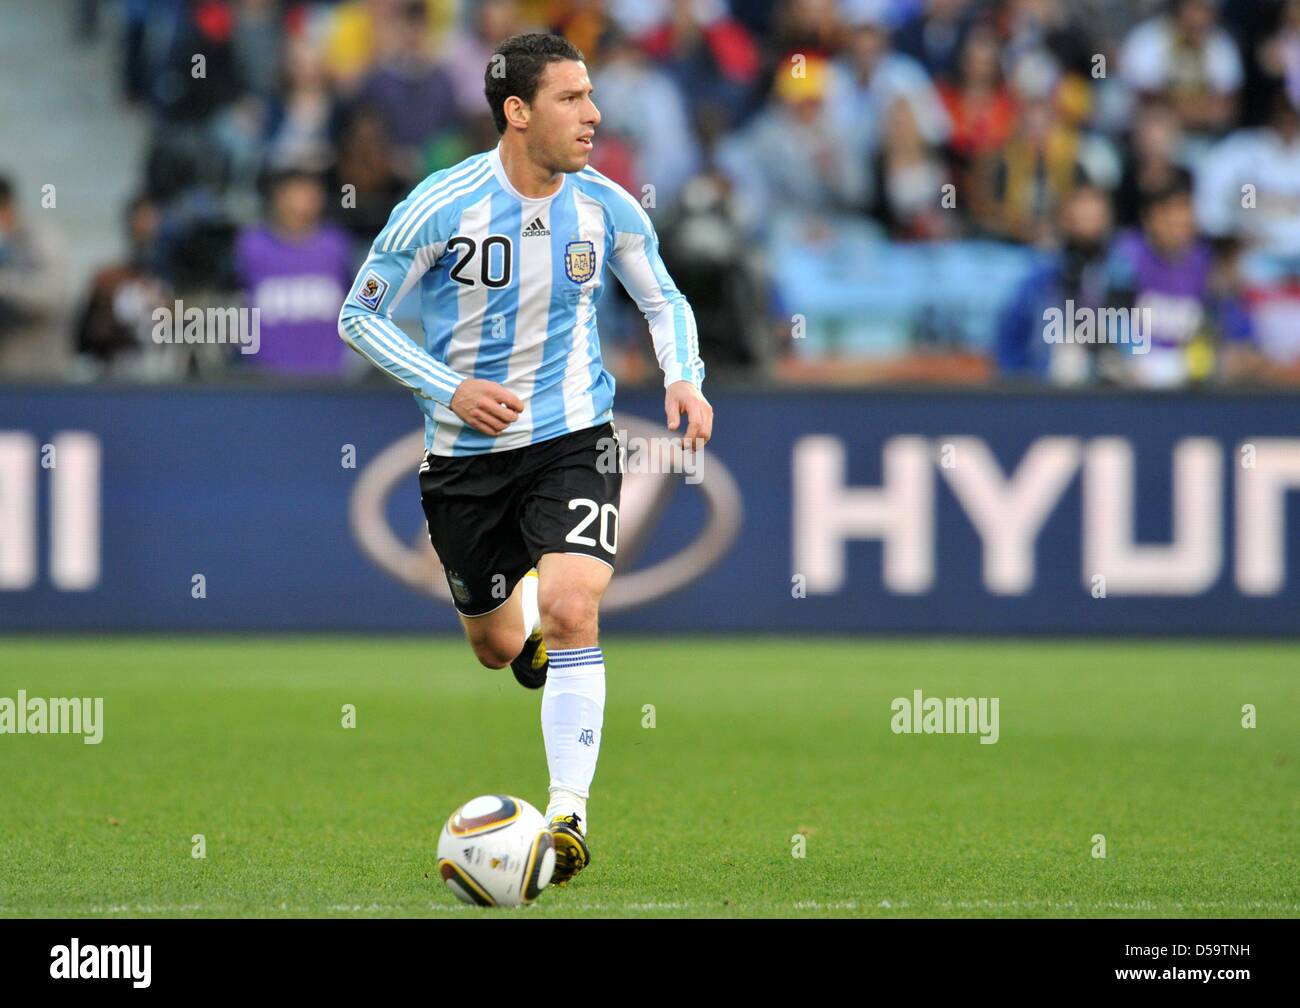 Maxi Rodriguez of Argentina controls the ball during the FIFA World Cup 2010 quarterfinal match between Argentina and Germany at the Green Point Stadium in Cape Town, South Africa 03 July 2010. Photo: Bernd Weissbrod dpa - Please refer to http://dpaq.de/FIFA-WM2010-TC Stock Photo